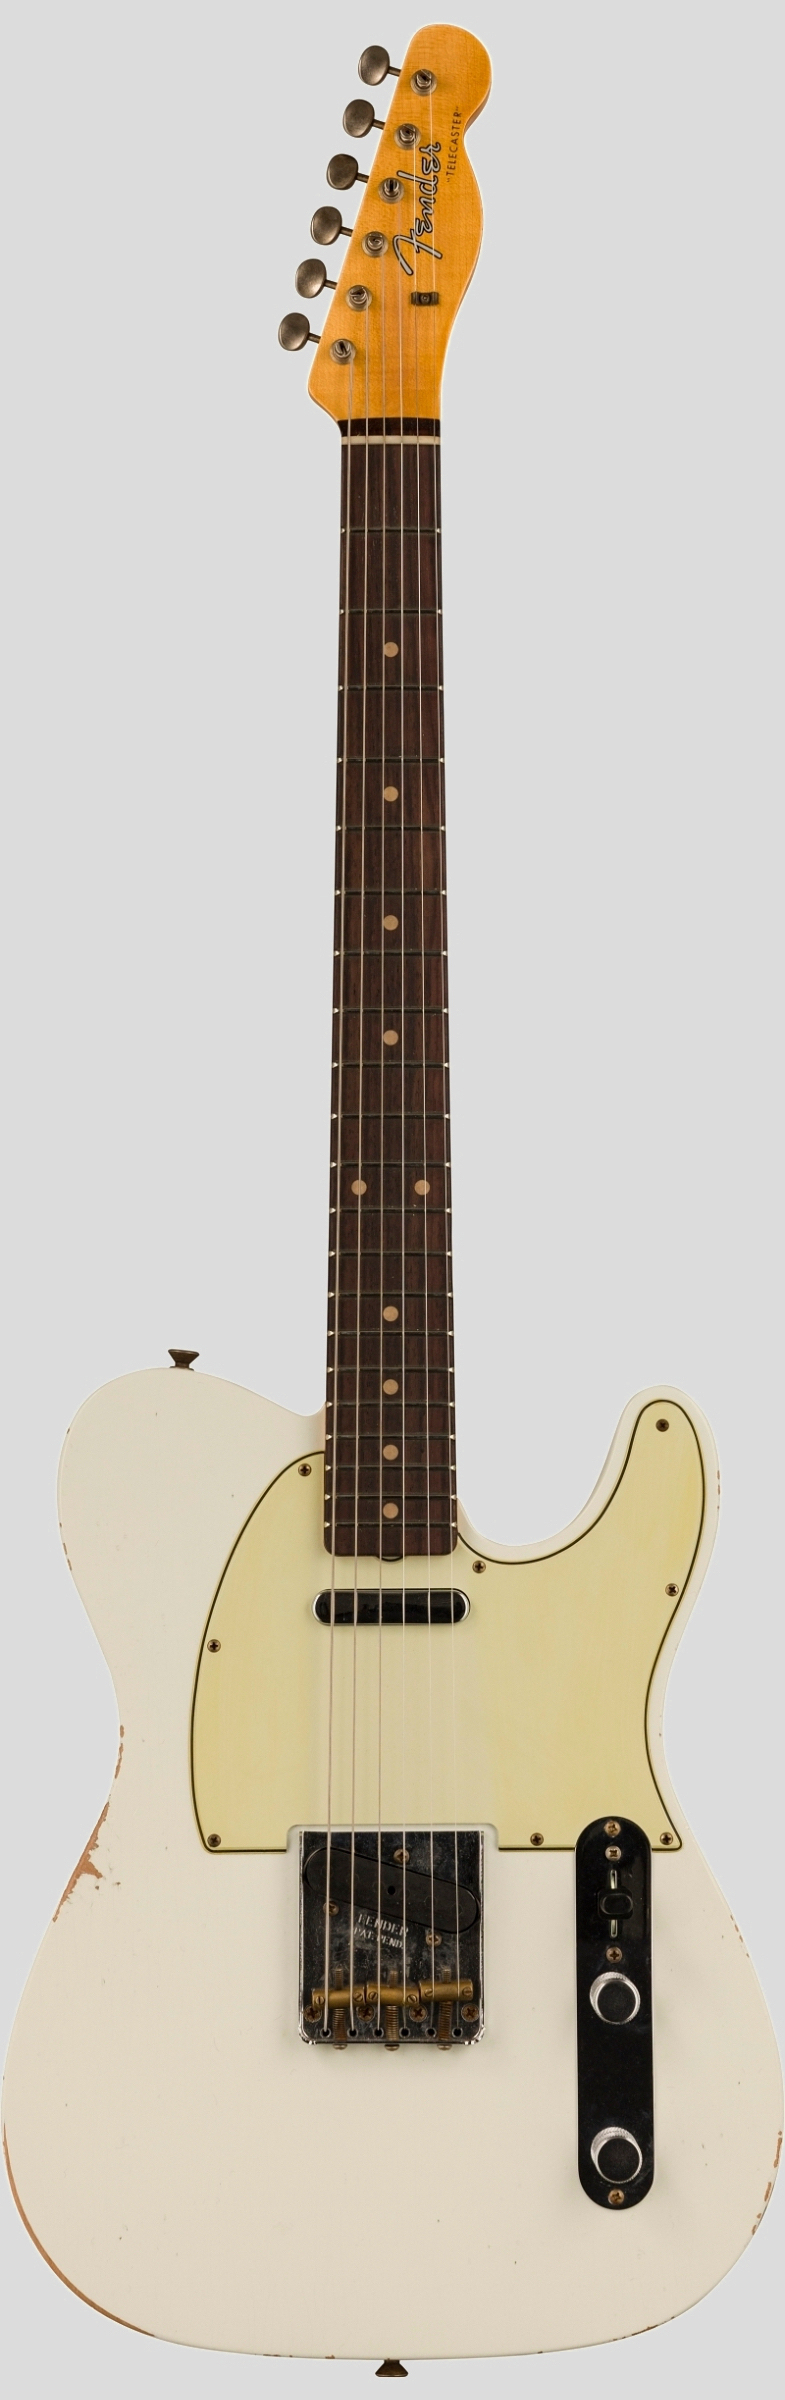 Fender Custom Shop Limited Edition 61 Telecaster Aged Olympic White Relic 1